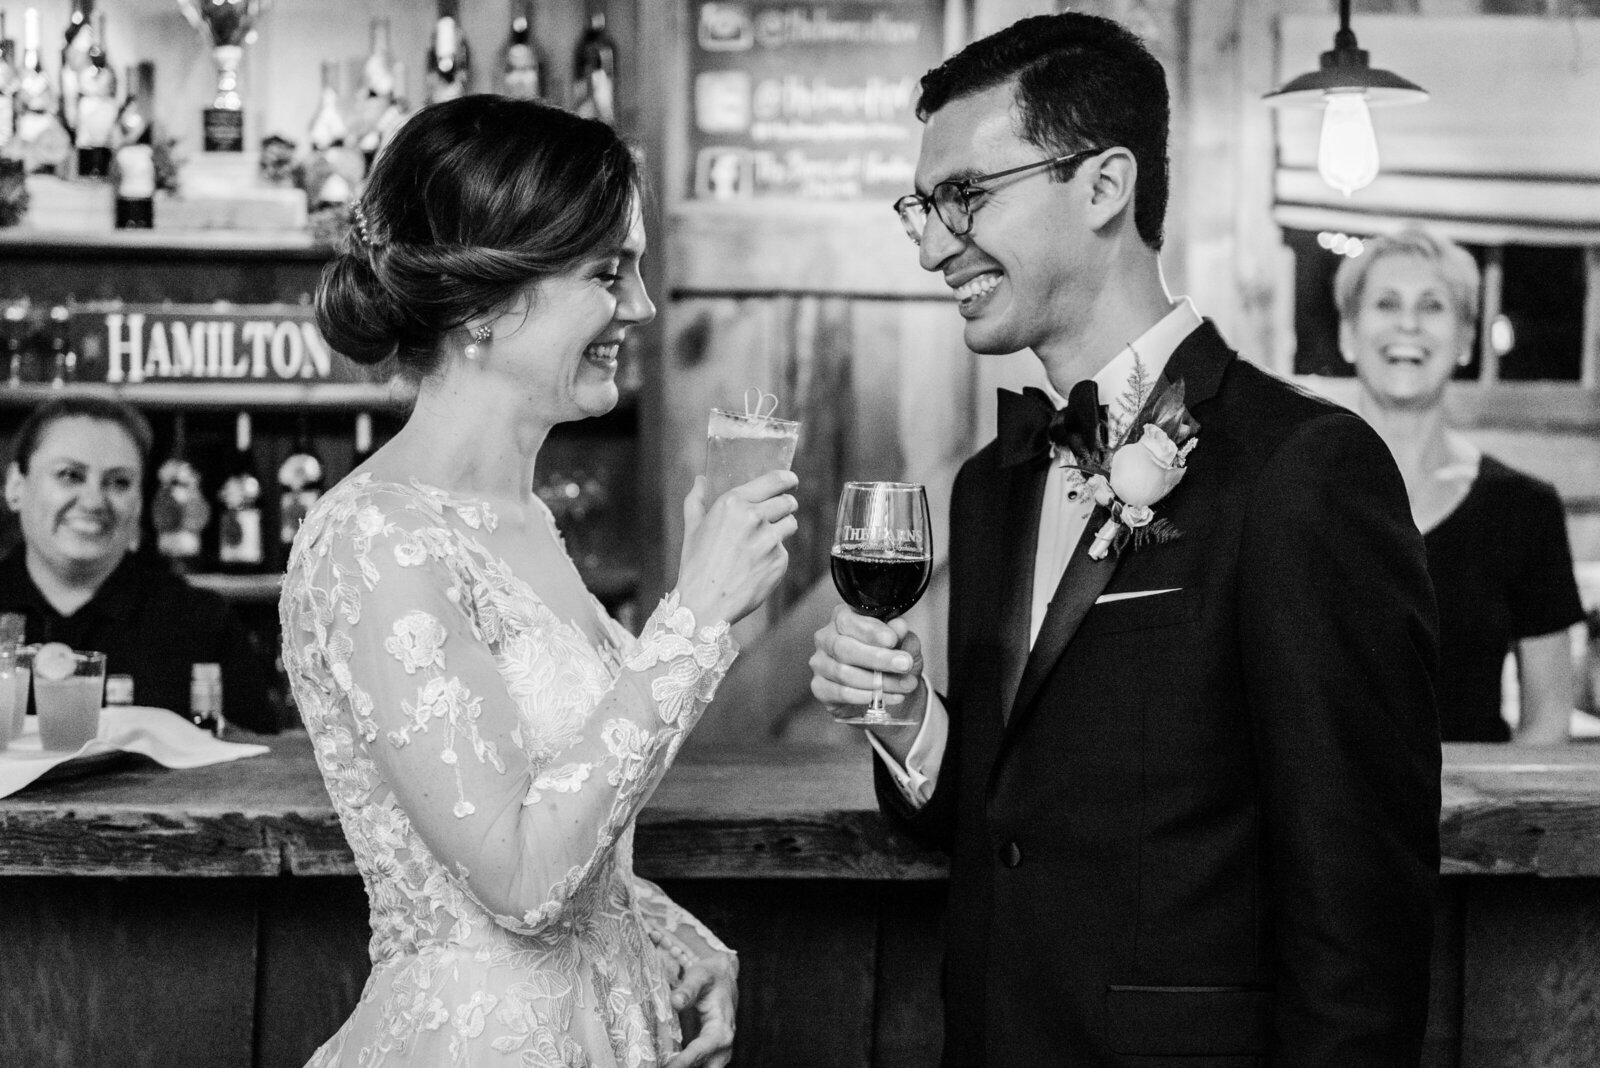 A bride and groom toast their drinks at the bar during their wedding at The Barns at Hamilton Station Vineyard in Loudoun County